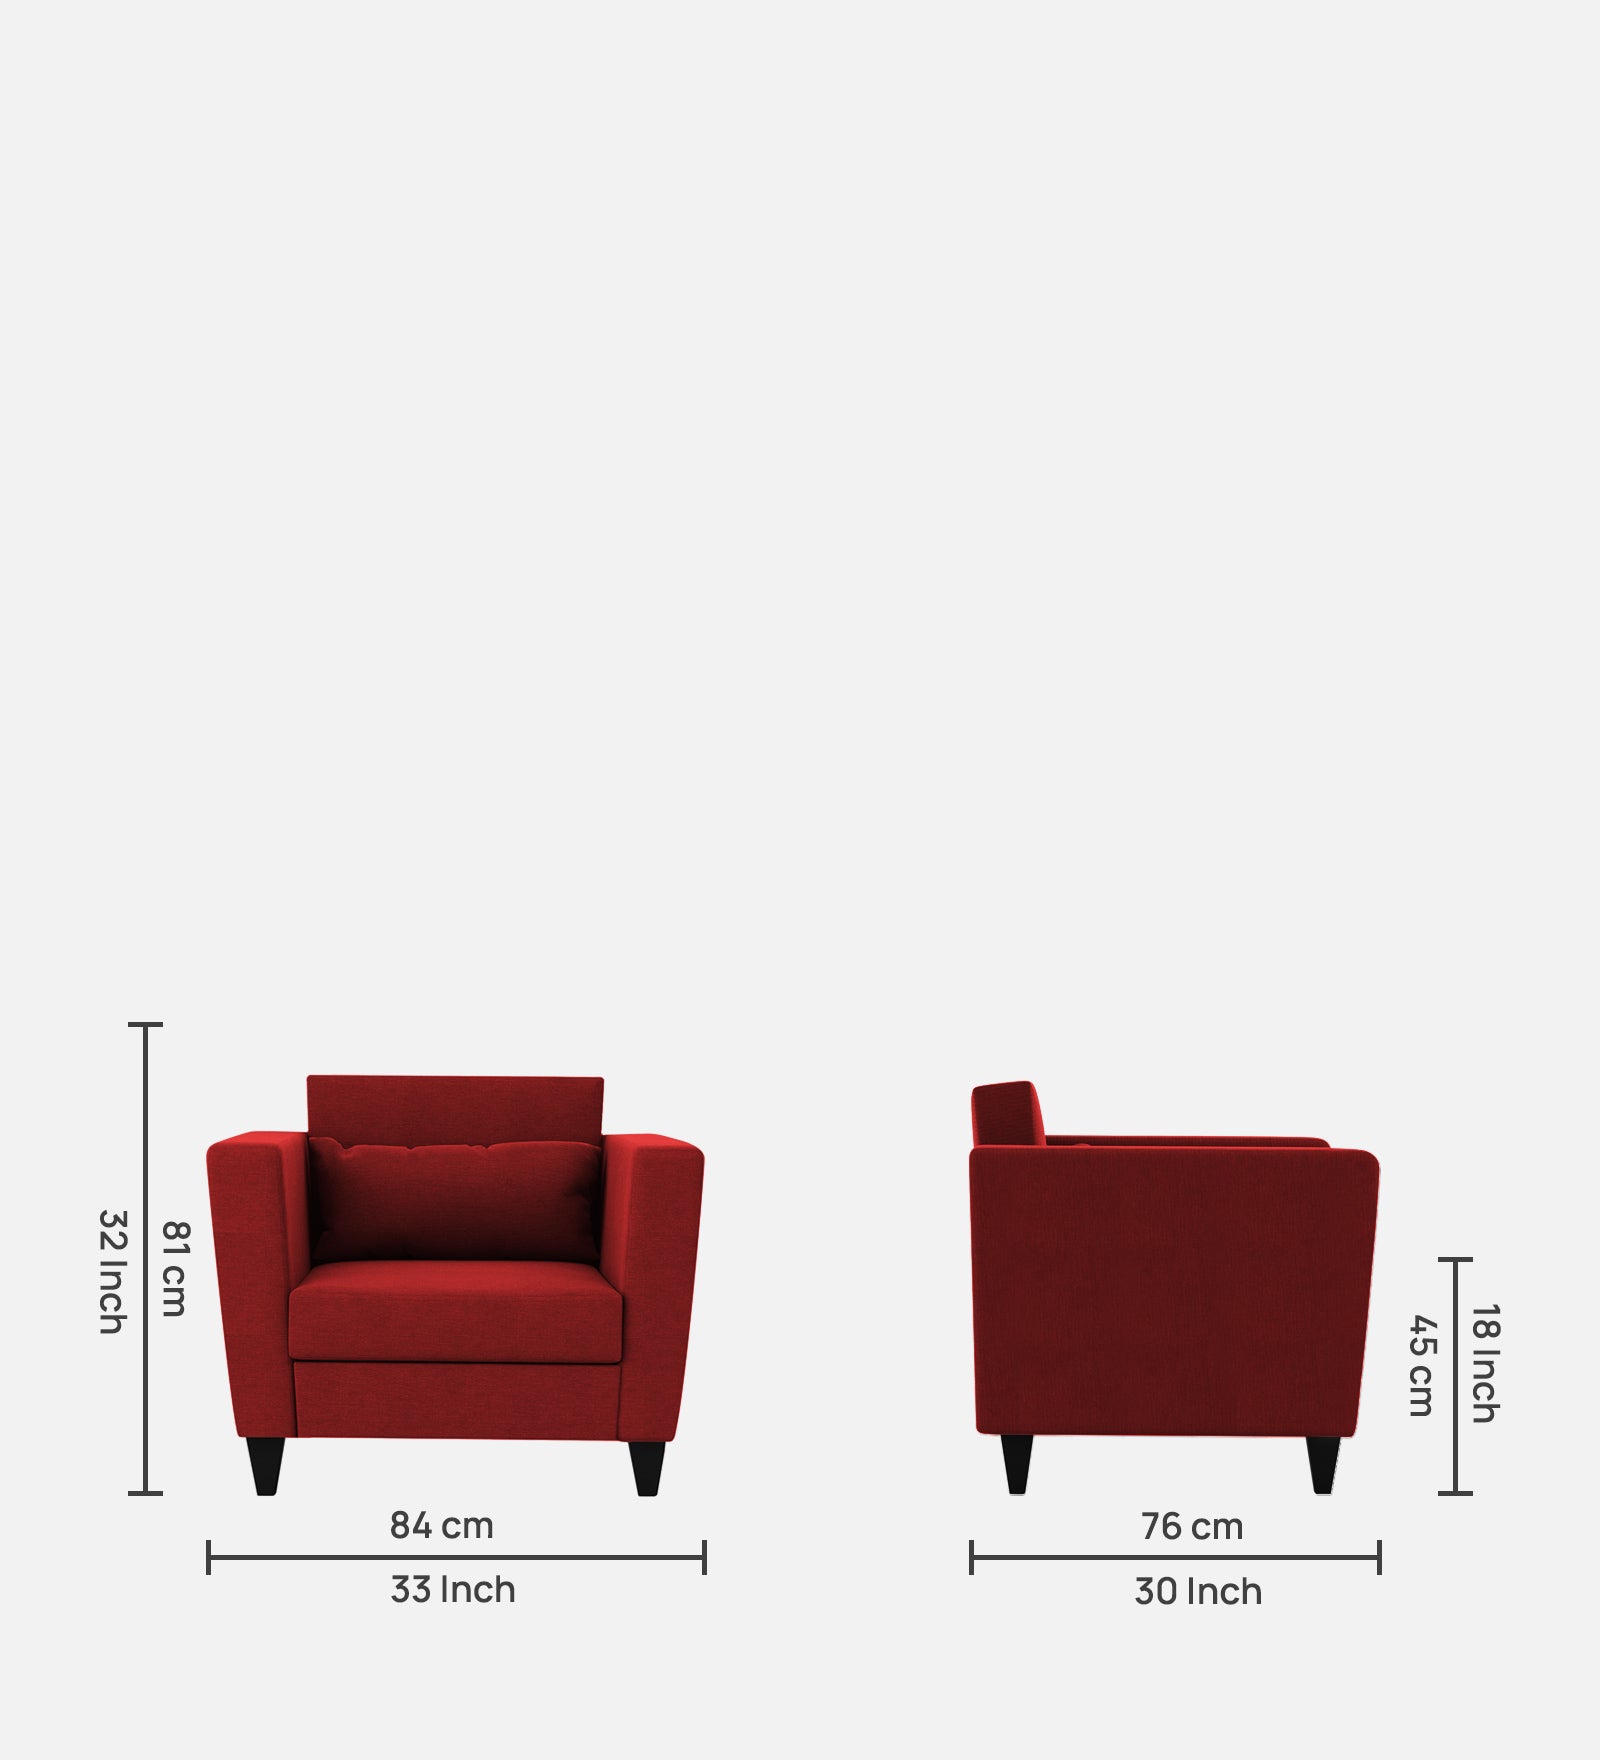 Tokyo Fabric 1 Seater Sofa in Blood Maroon Colour